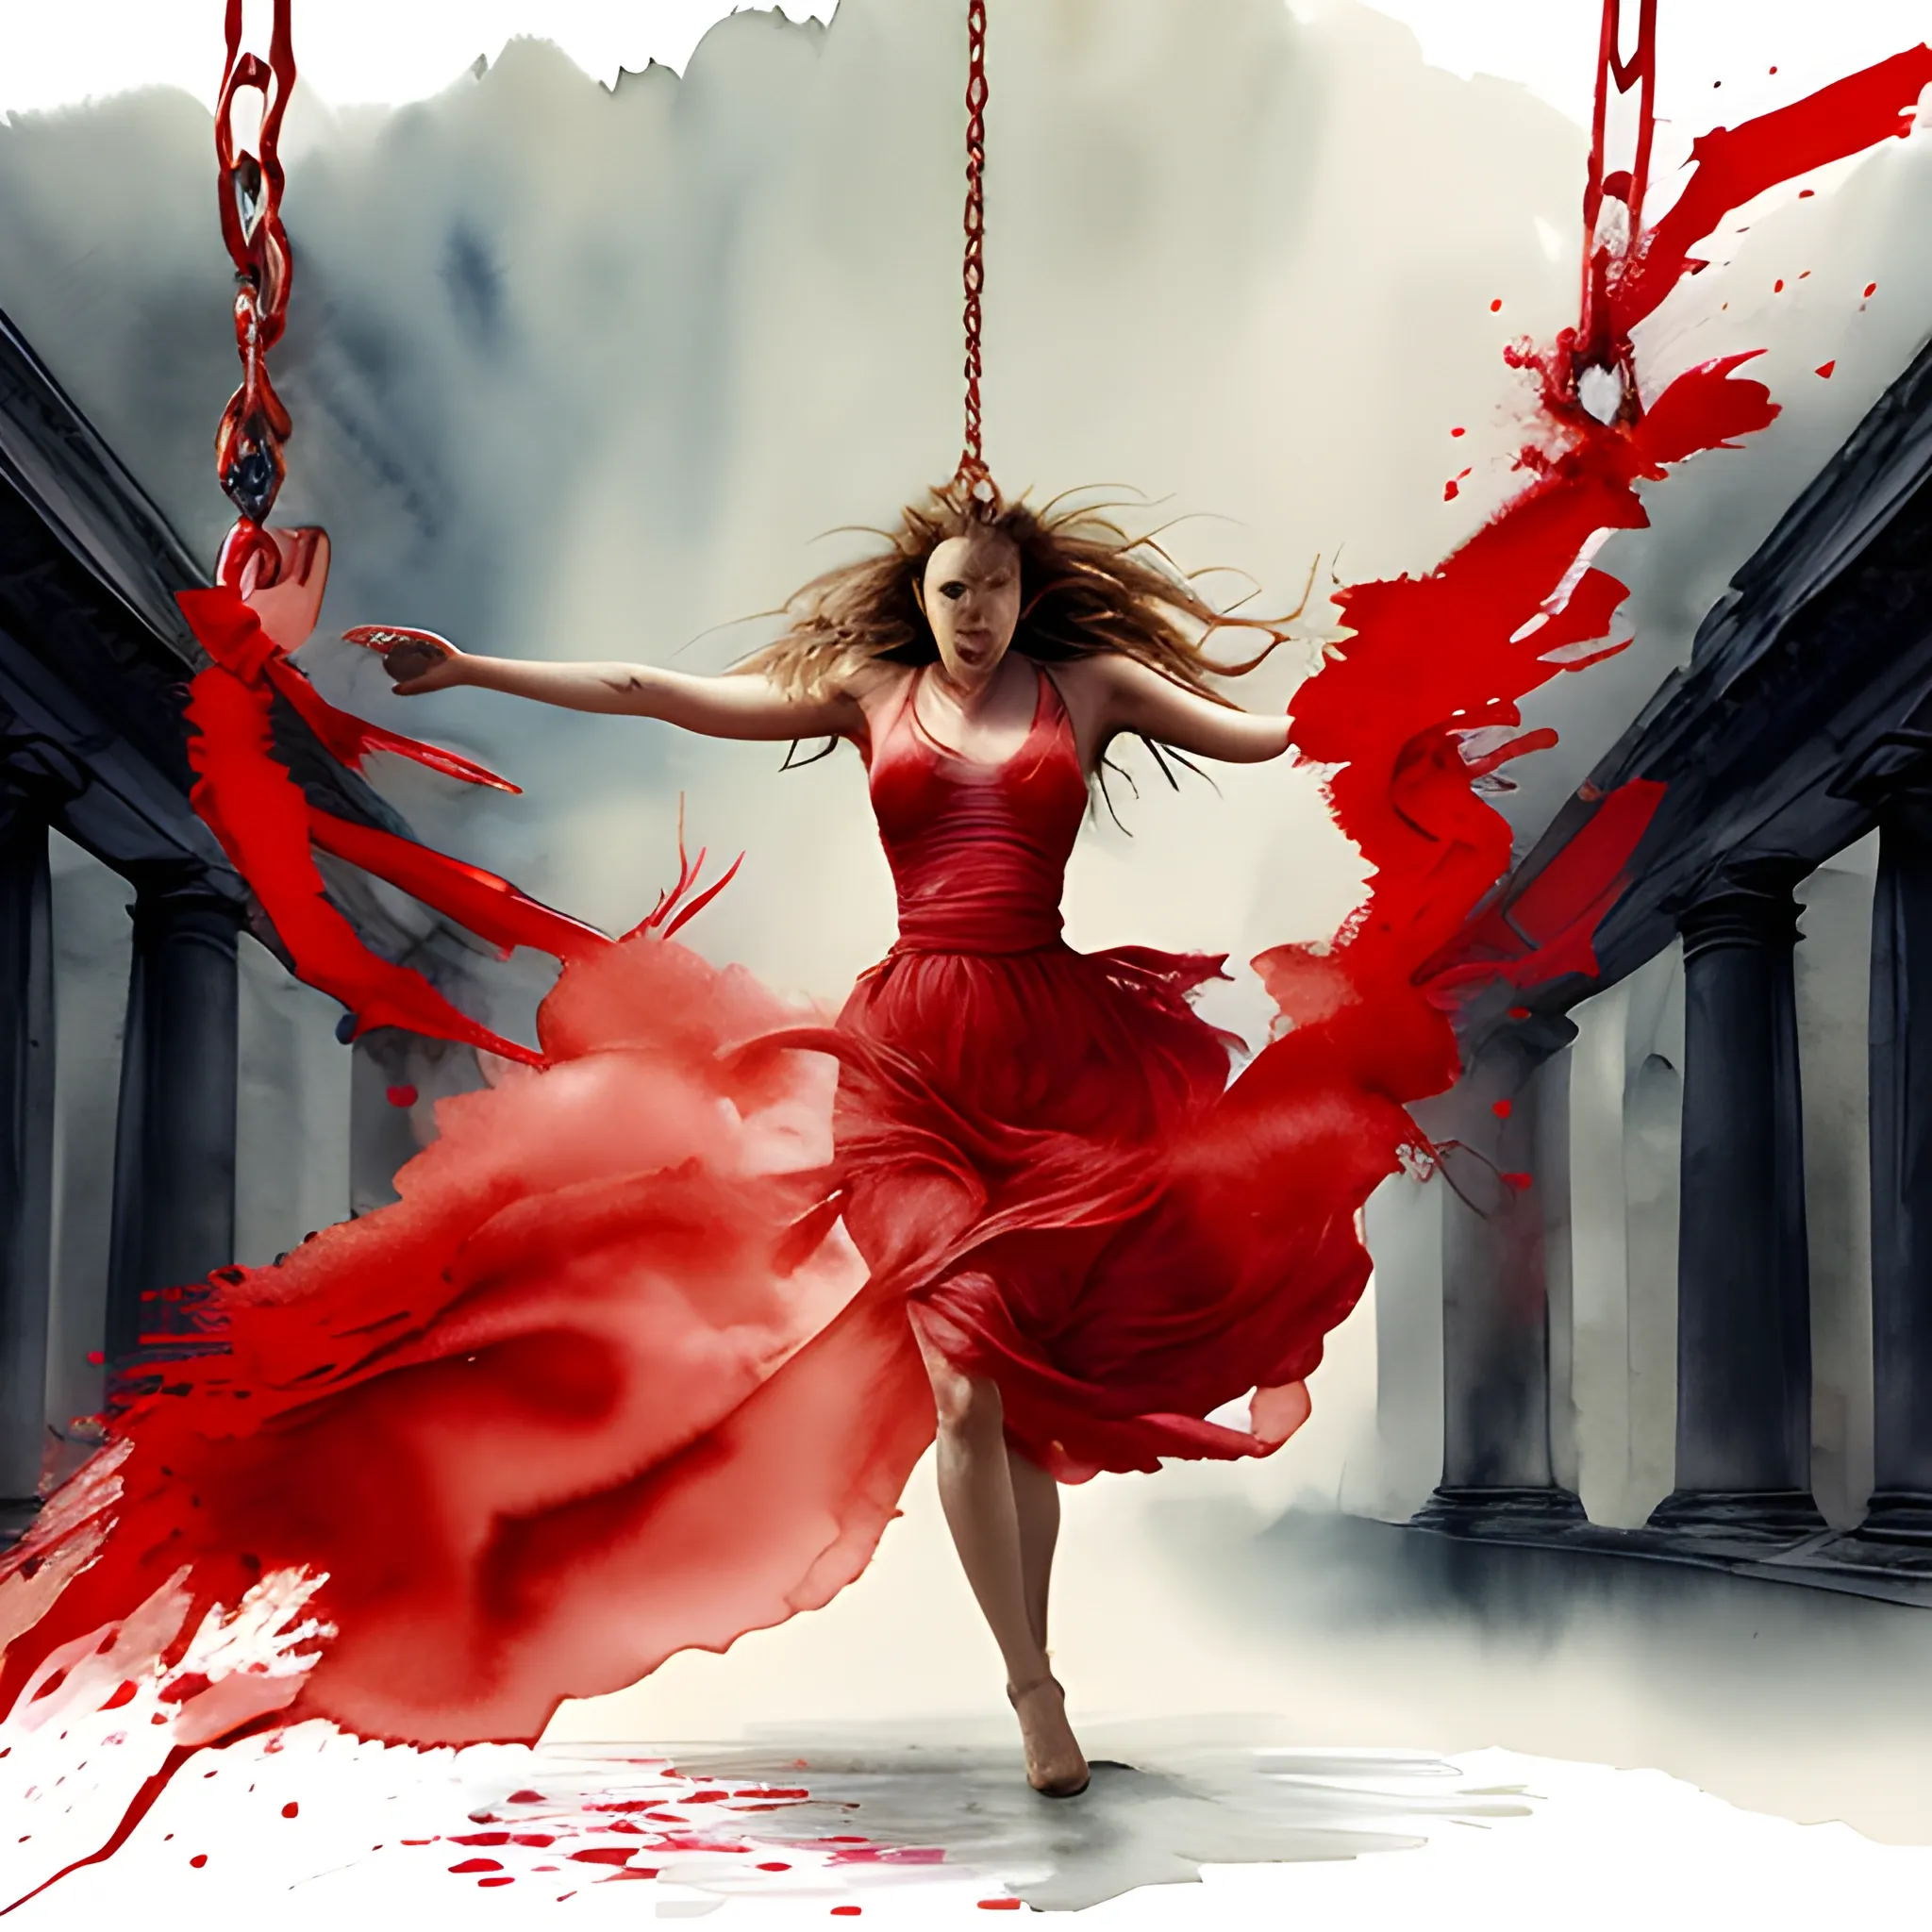 "Illustrate a powerful scene with Ana de Armas as a woman breaking free from heavy, ancient chains that have bound her for centuries. Utilize watercolor techniques reminiscent of the renowned painter J.M.W. Turner, with the predominant use of the color red to symbolize her liberation and strength